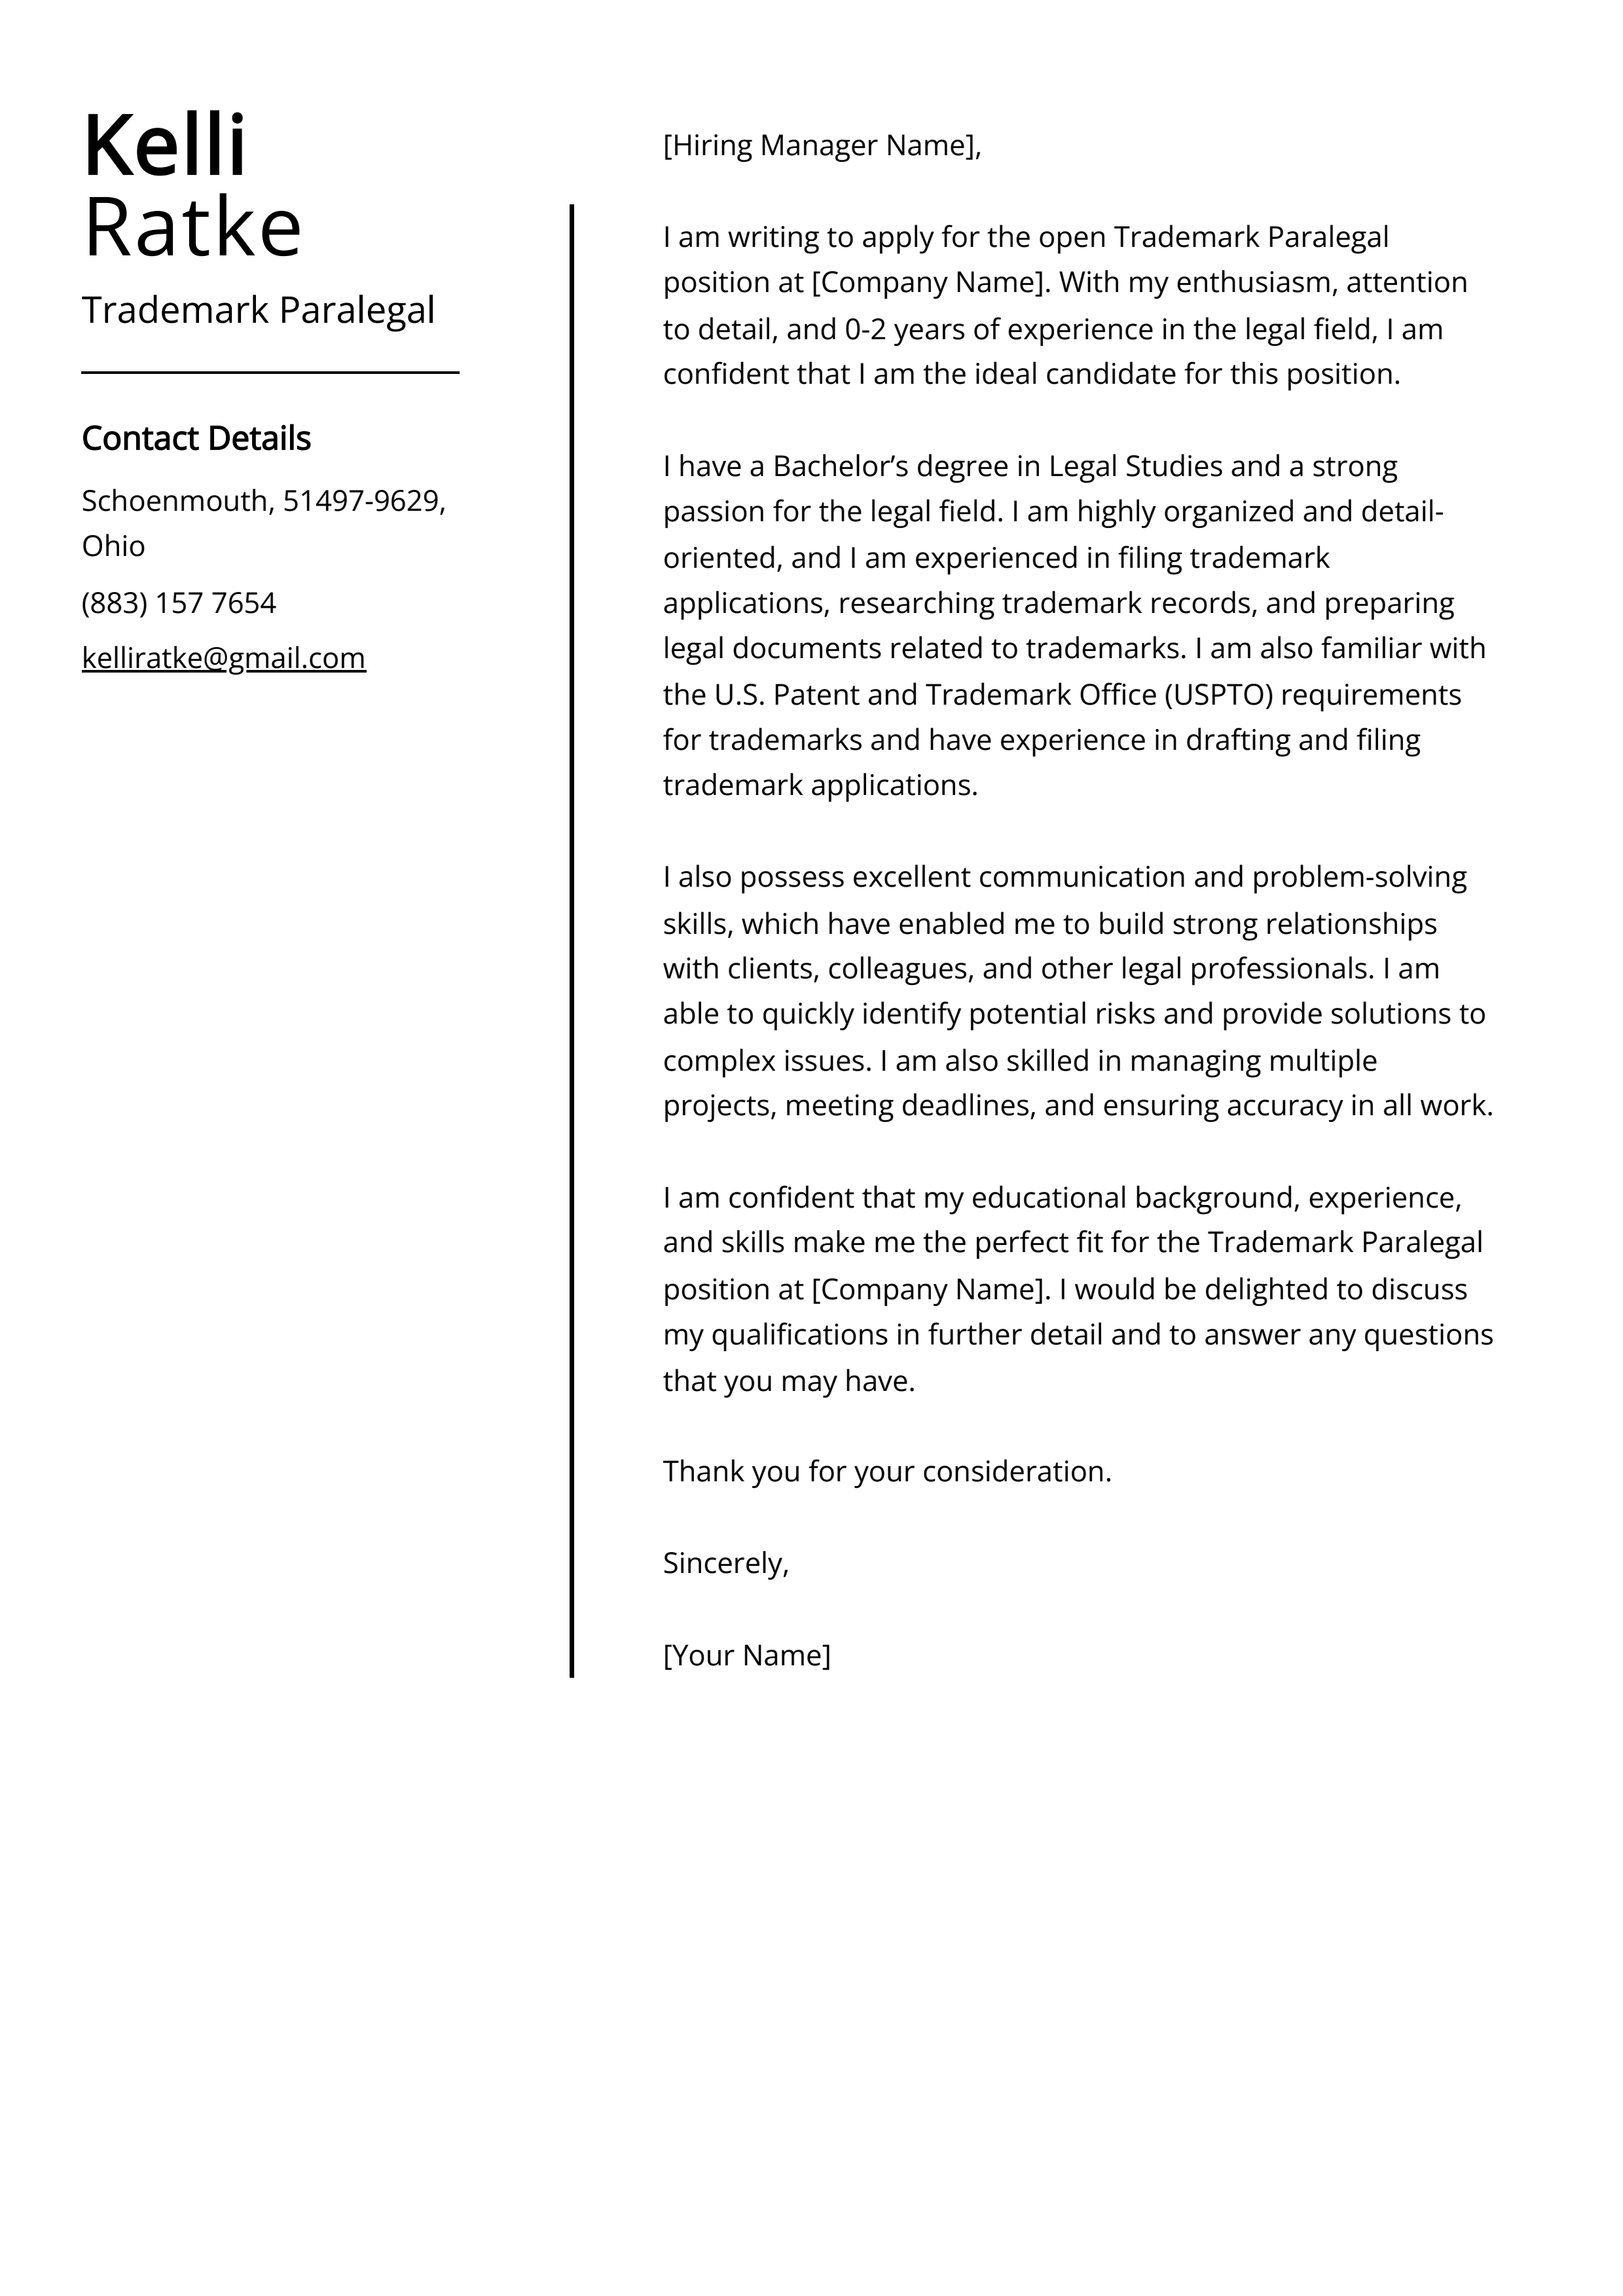 Trademark Paralegal Cover Letter Example